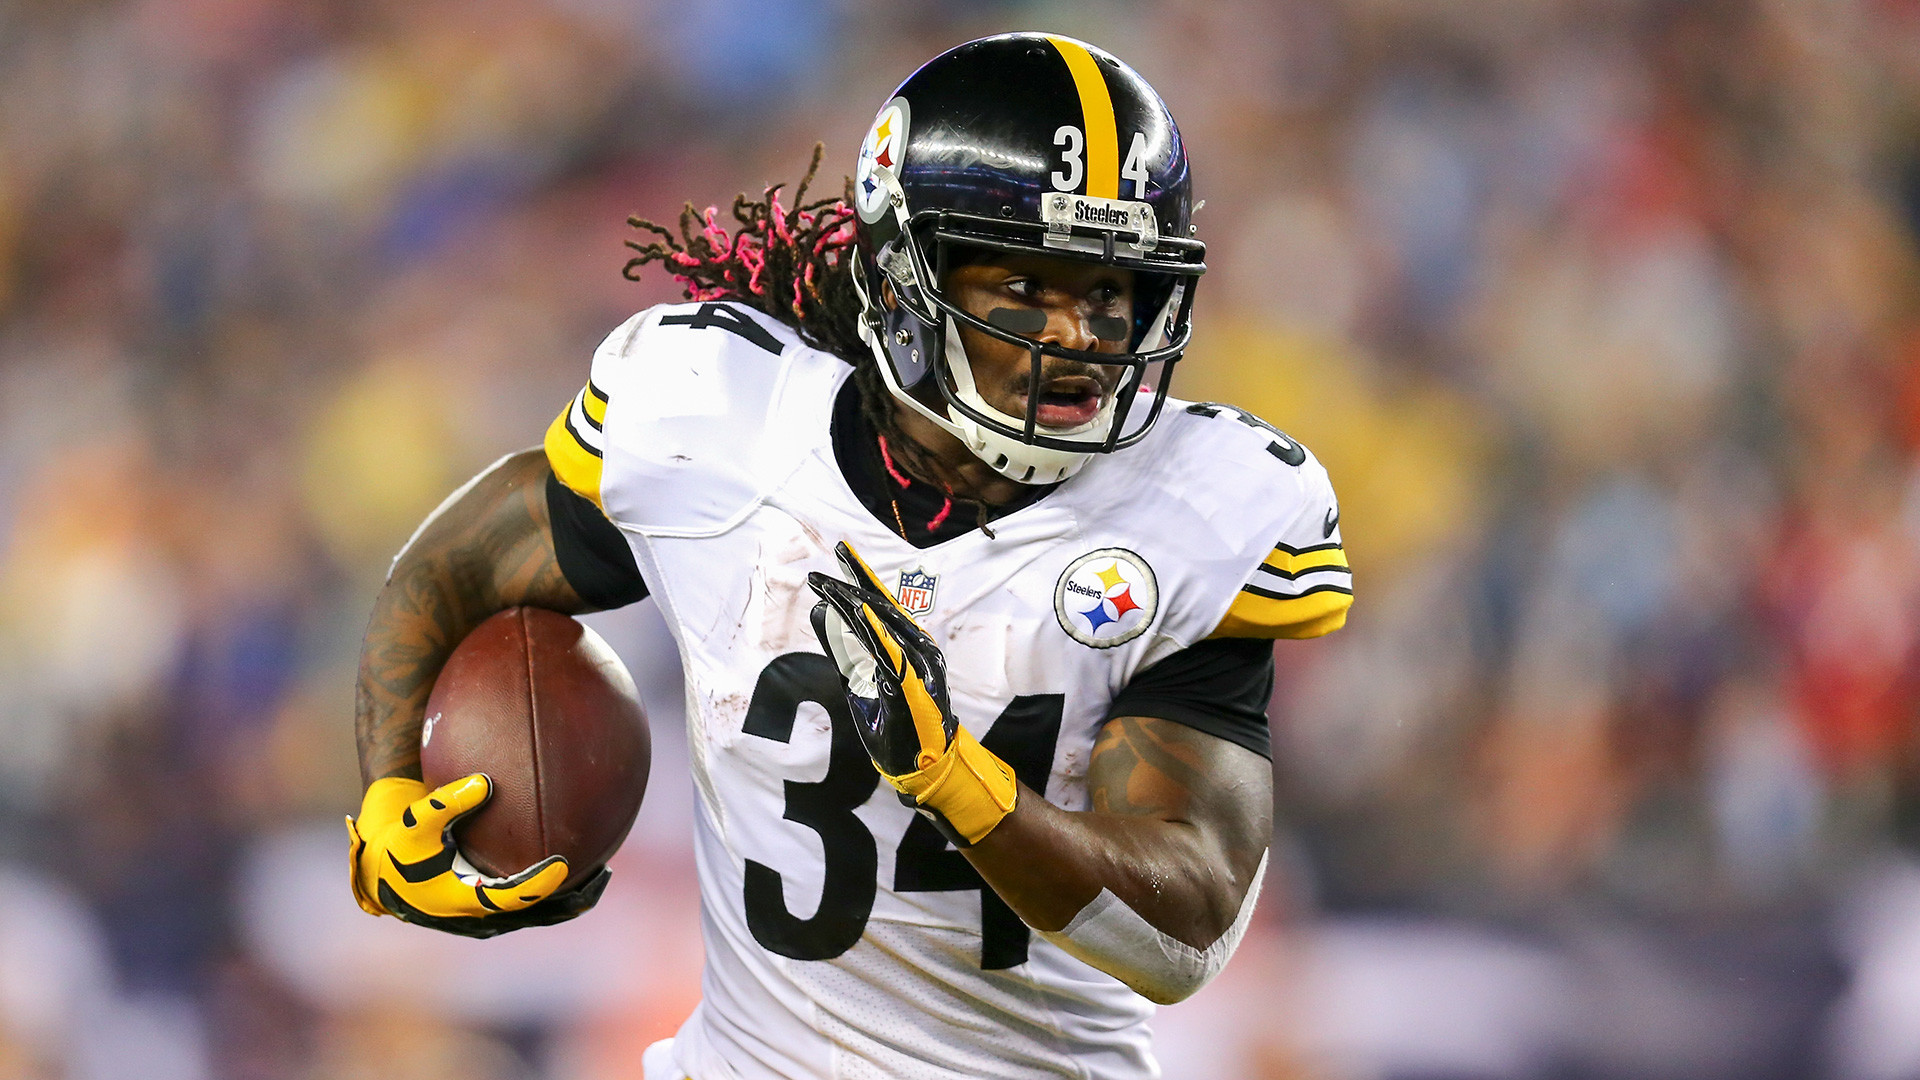 Despite his impressive performance, Williams recently lost the starting job  to LeVeon Bell.